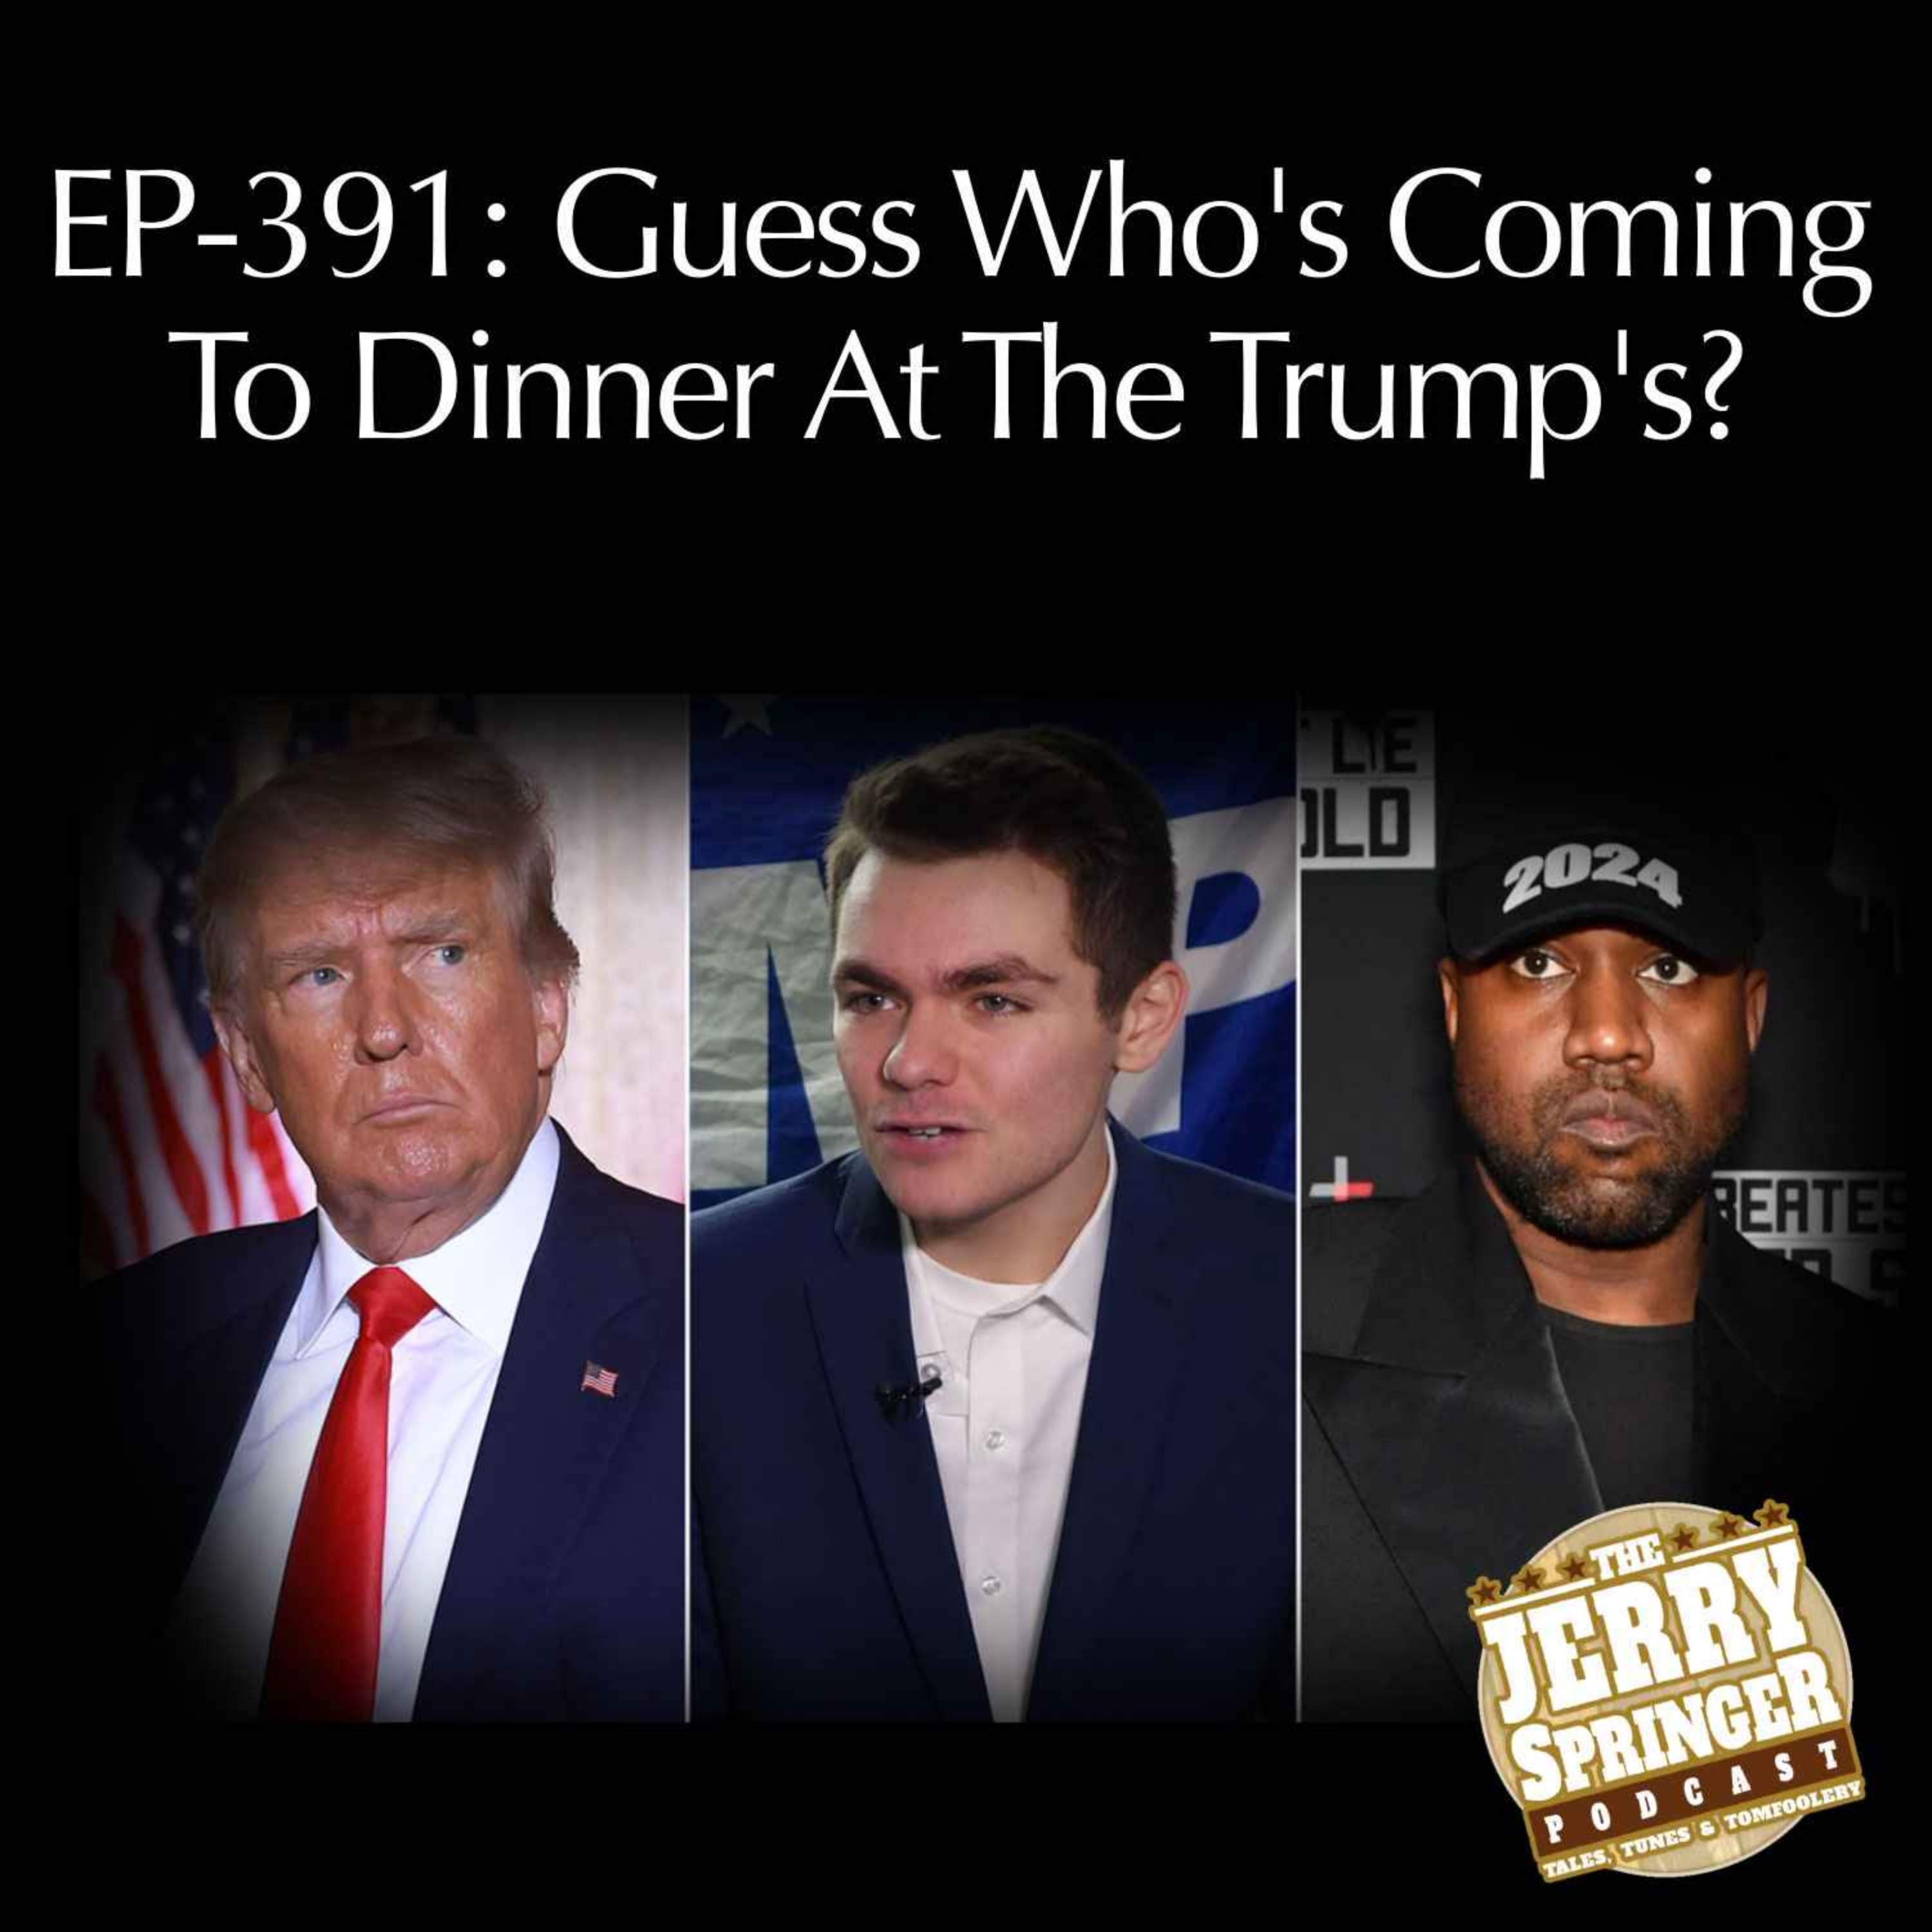 Guess Who's Coming To Dinner At The Trump's? EP - 391